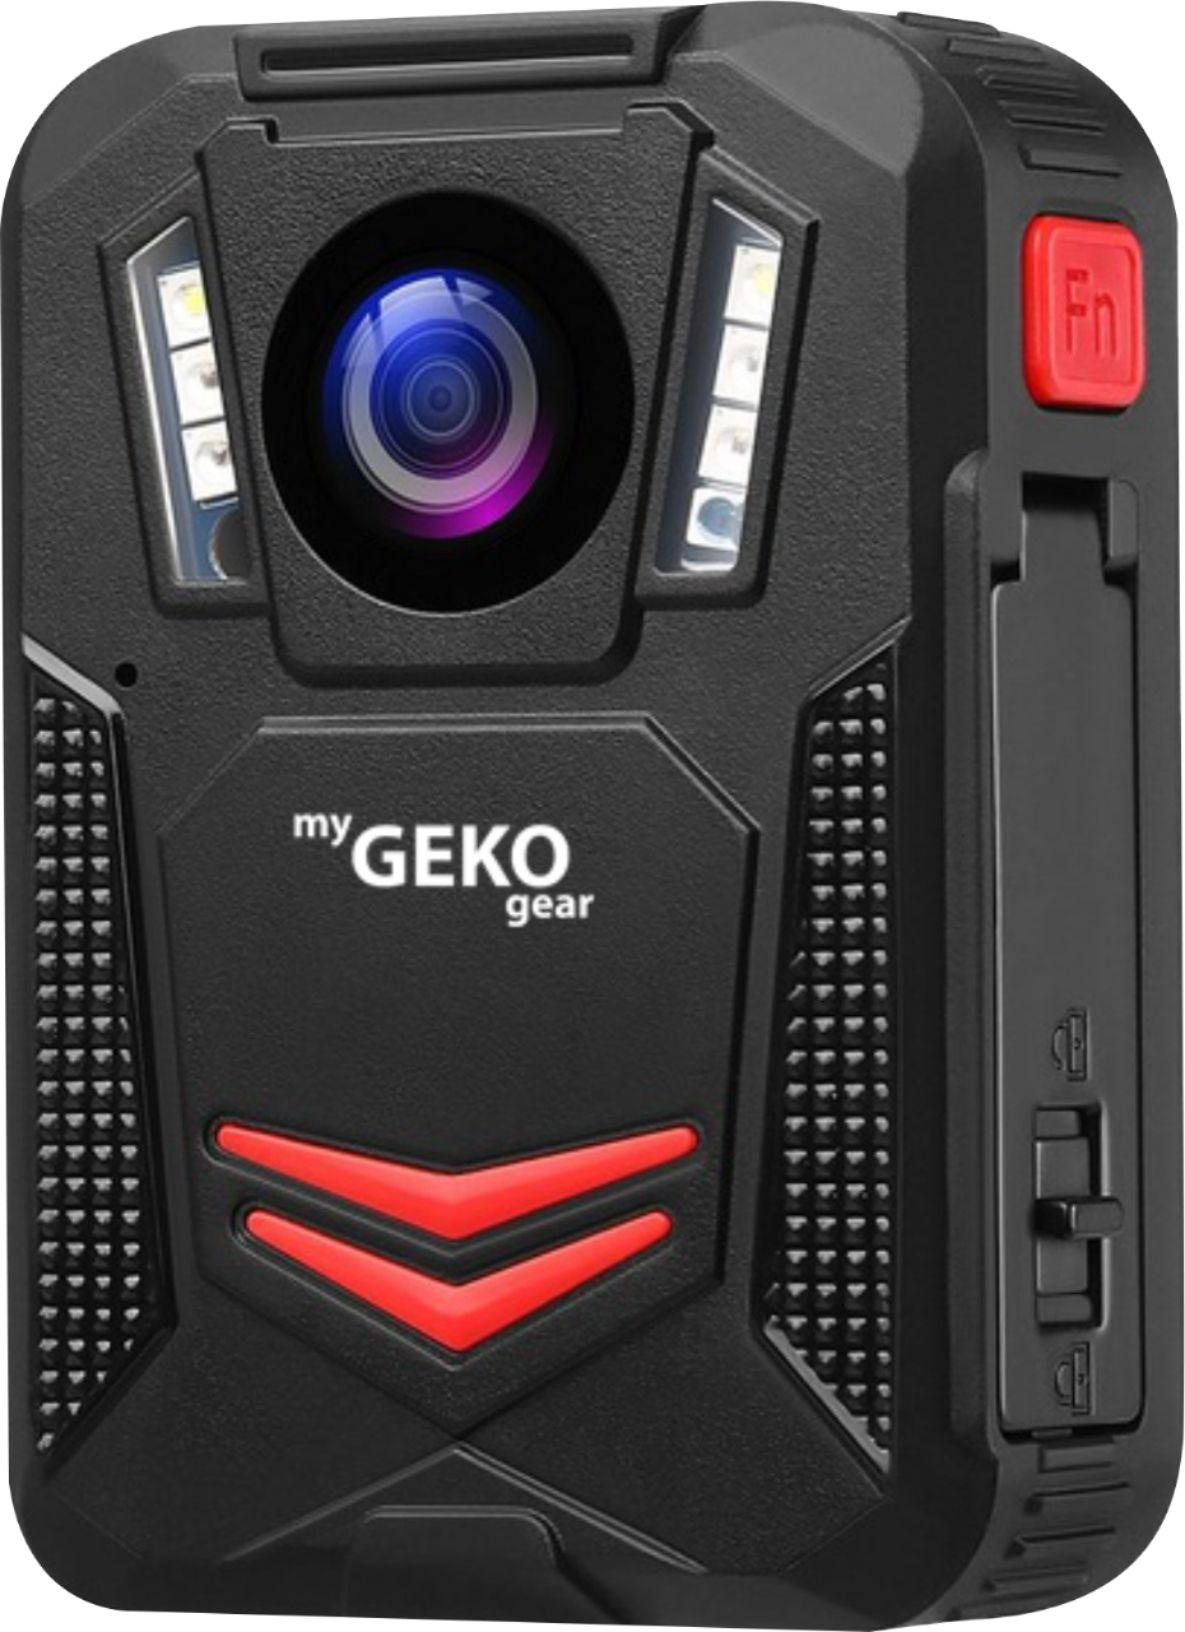 Left View: myGEKOgear - Aegis 300 1440p Body Camera Infrared Lights Water Resistance Password Protected GPS & Wi-Fi (Two Batteries)